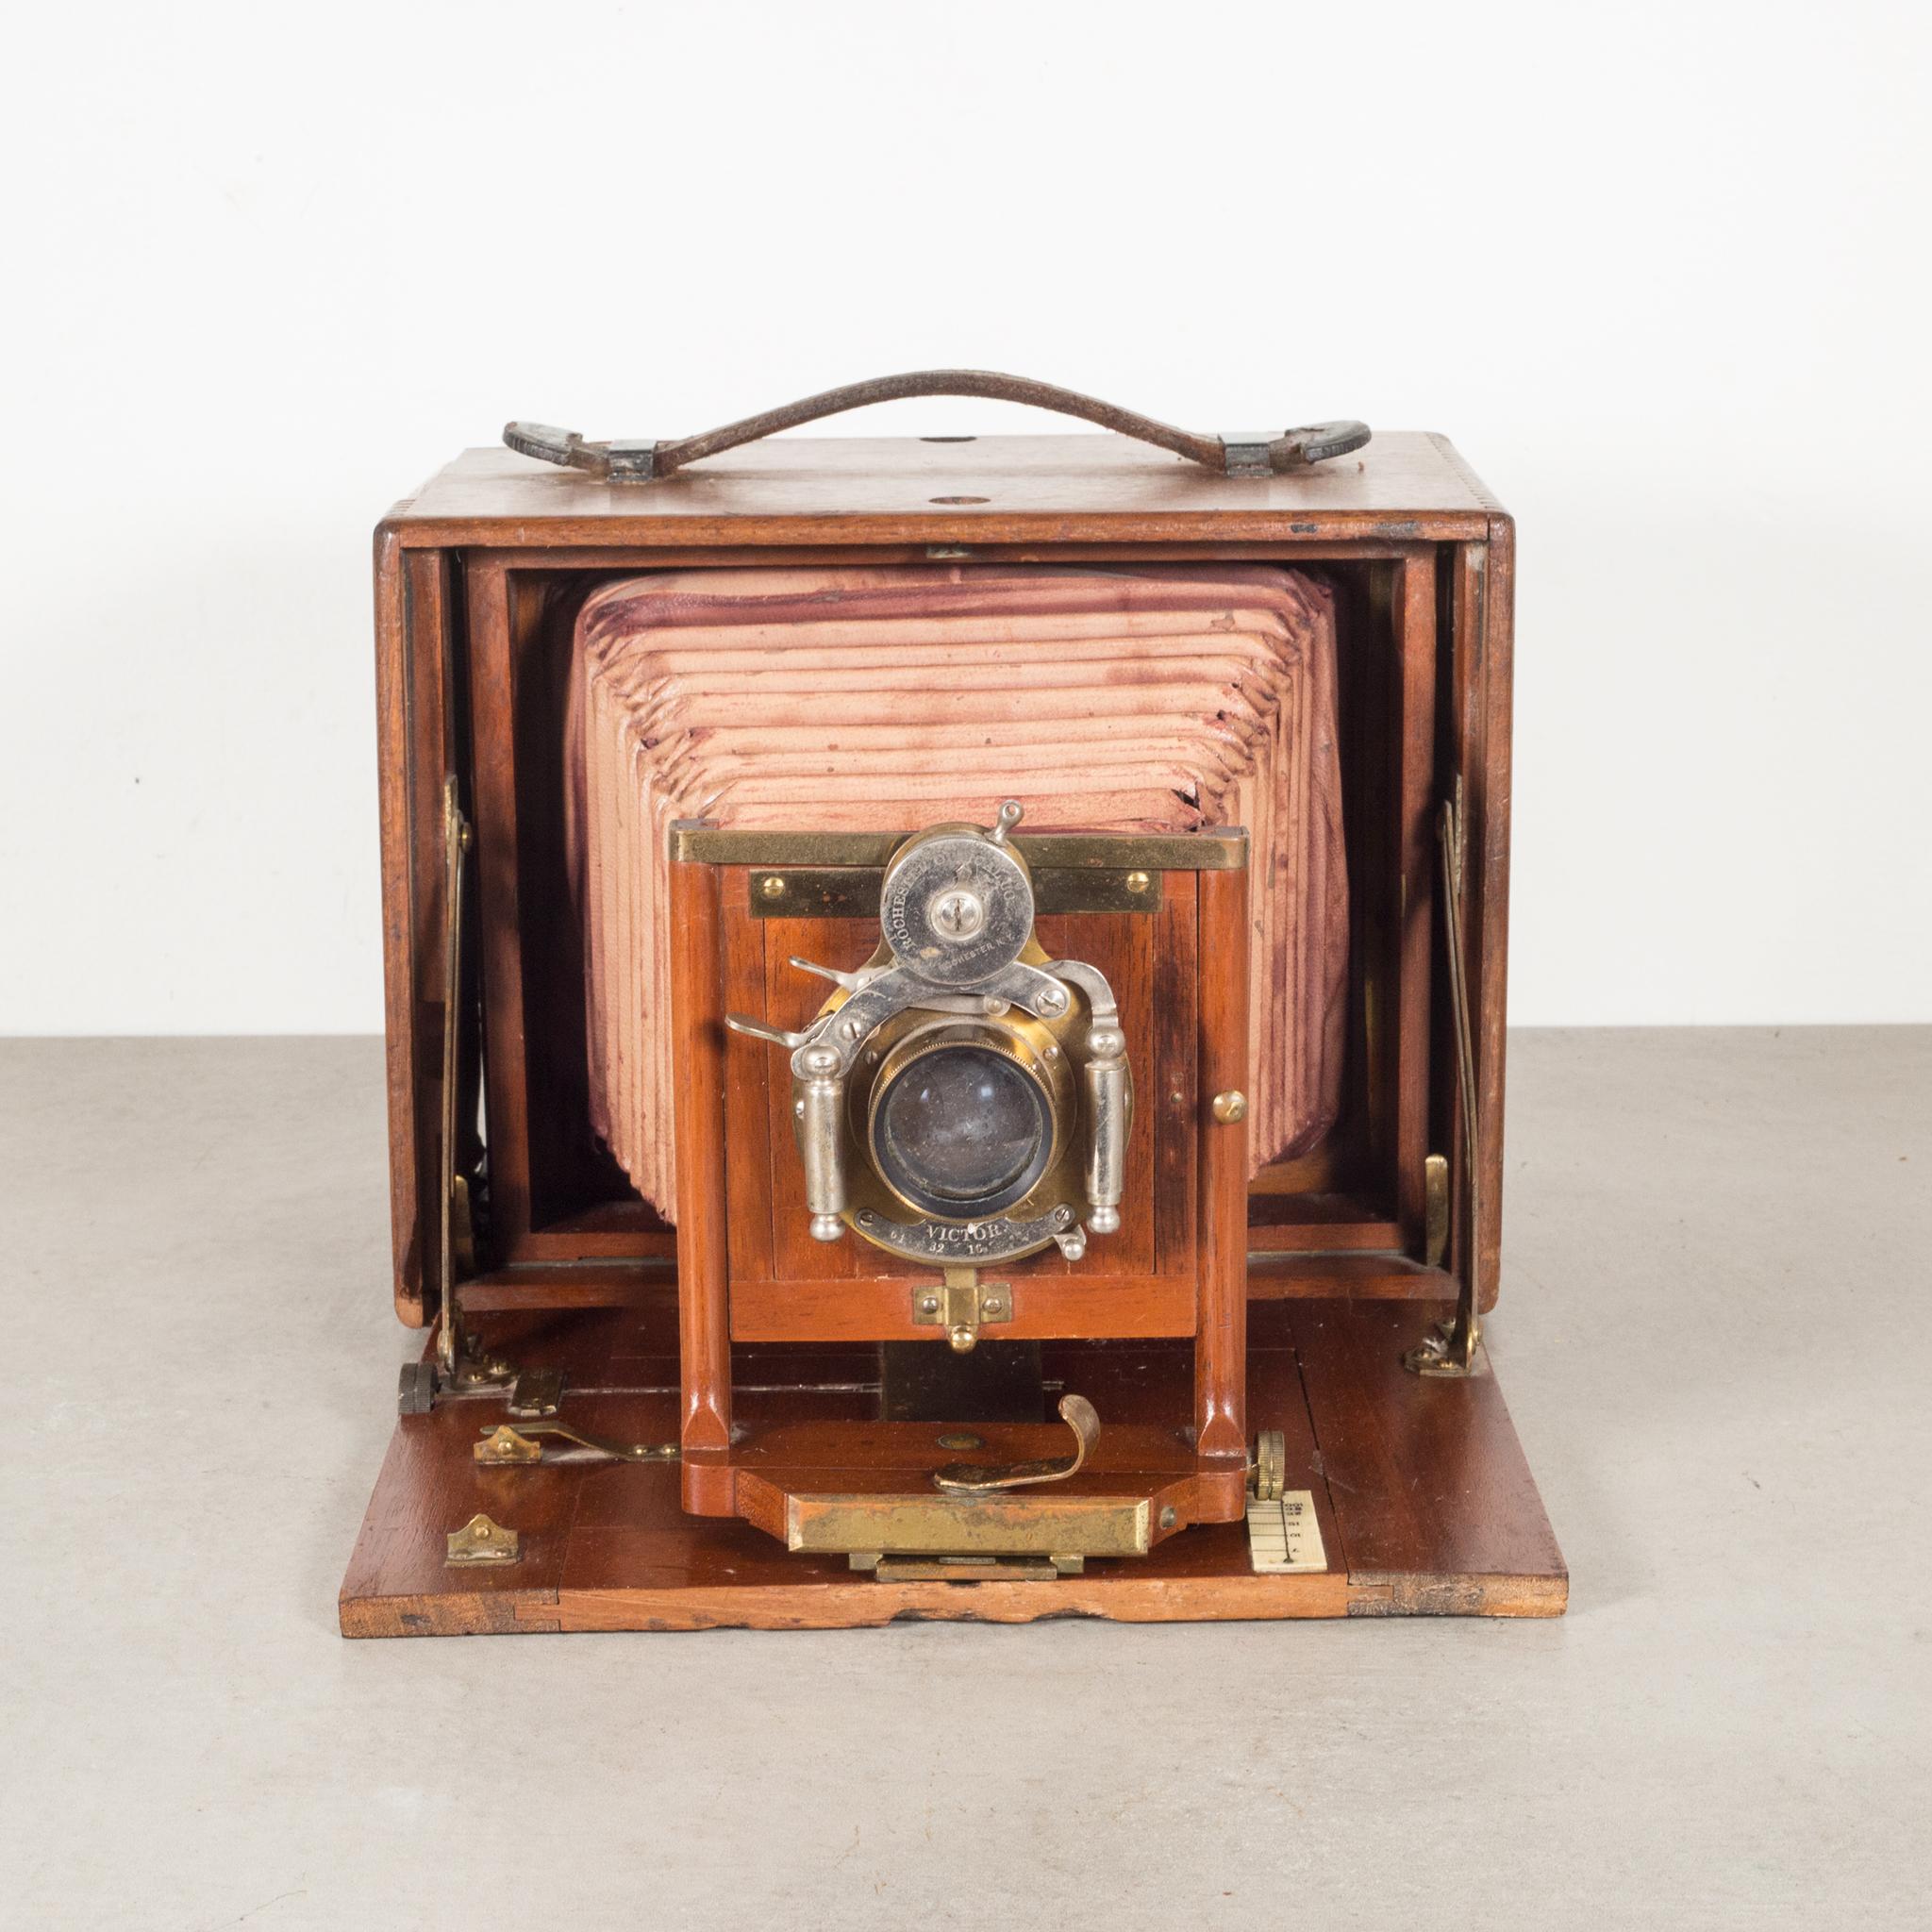 About

An original Premo long focus folding camera with a brass and leather strap, Mahogany case and Mahogany front. Camera folds open and closes properly.

Camera is sold for decorative purposes only.

Creator Rochester Optical Co.
Date of